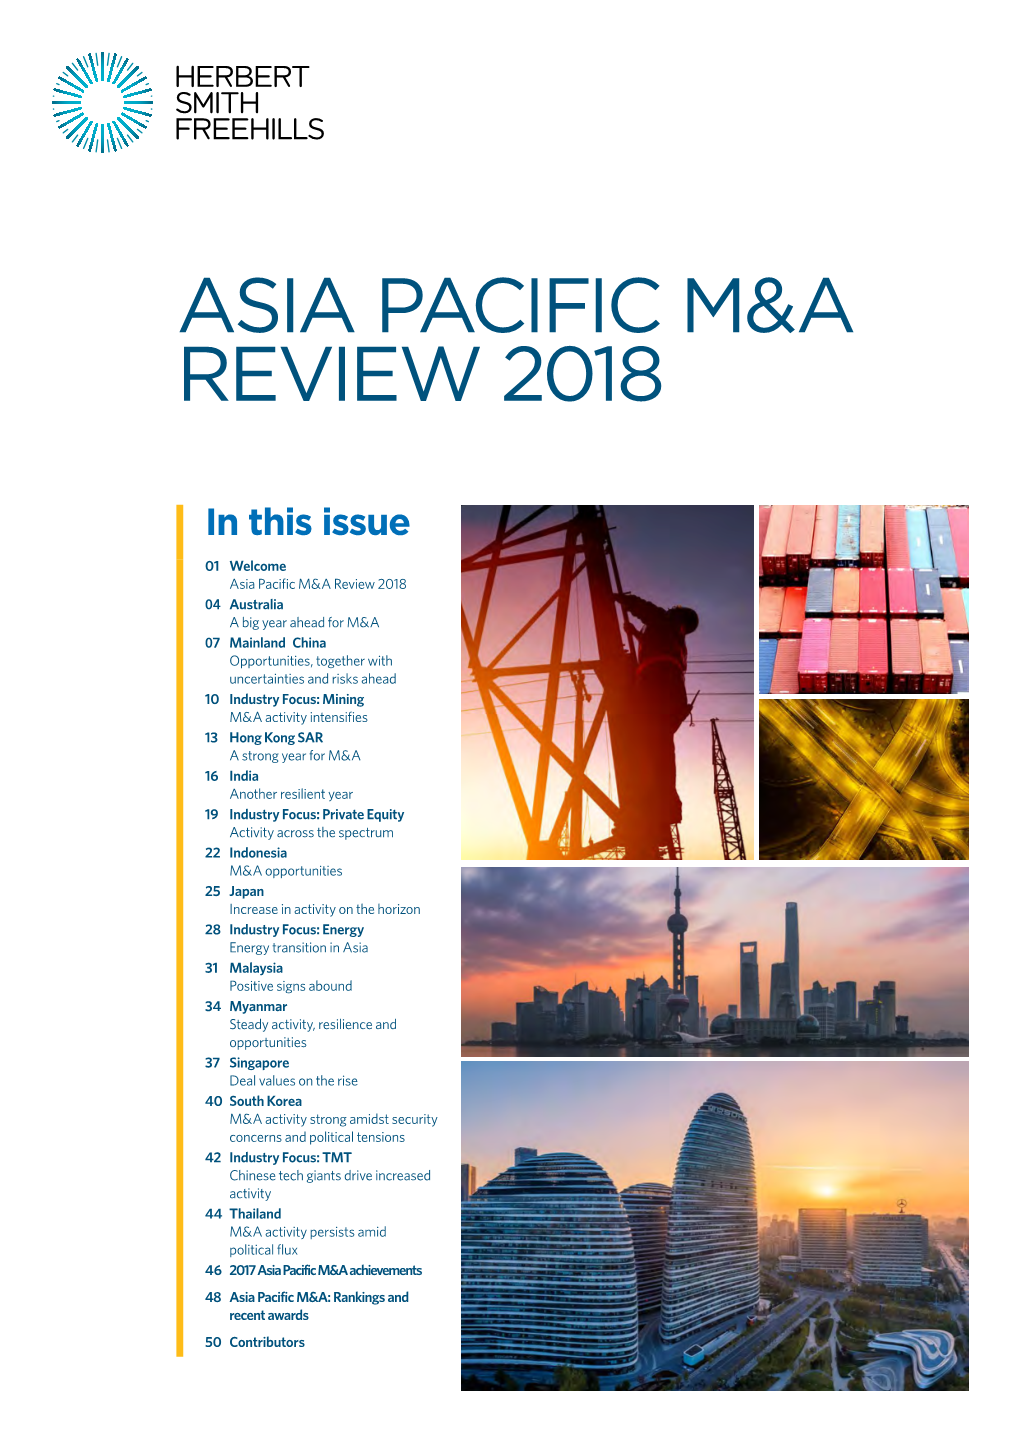 Asia Pacific M&A Review 2018